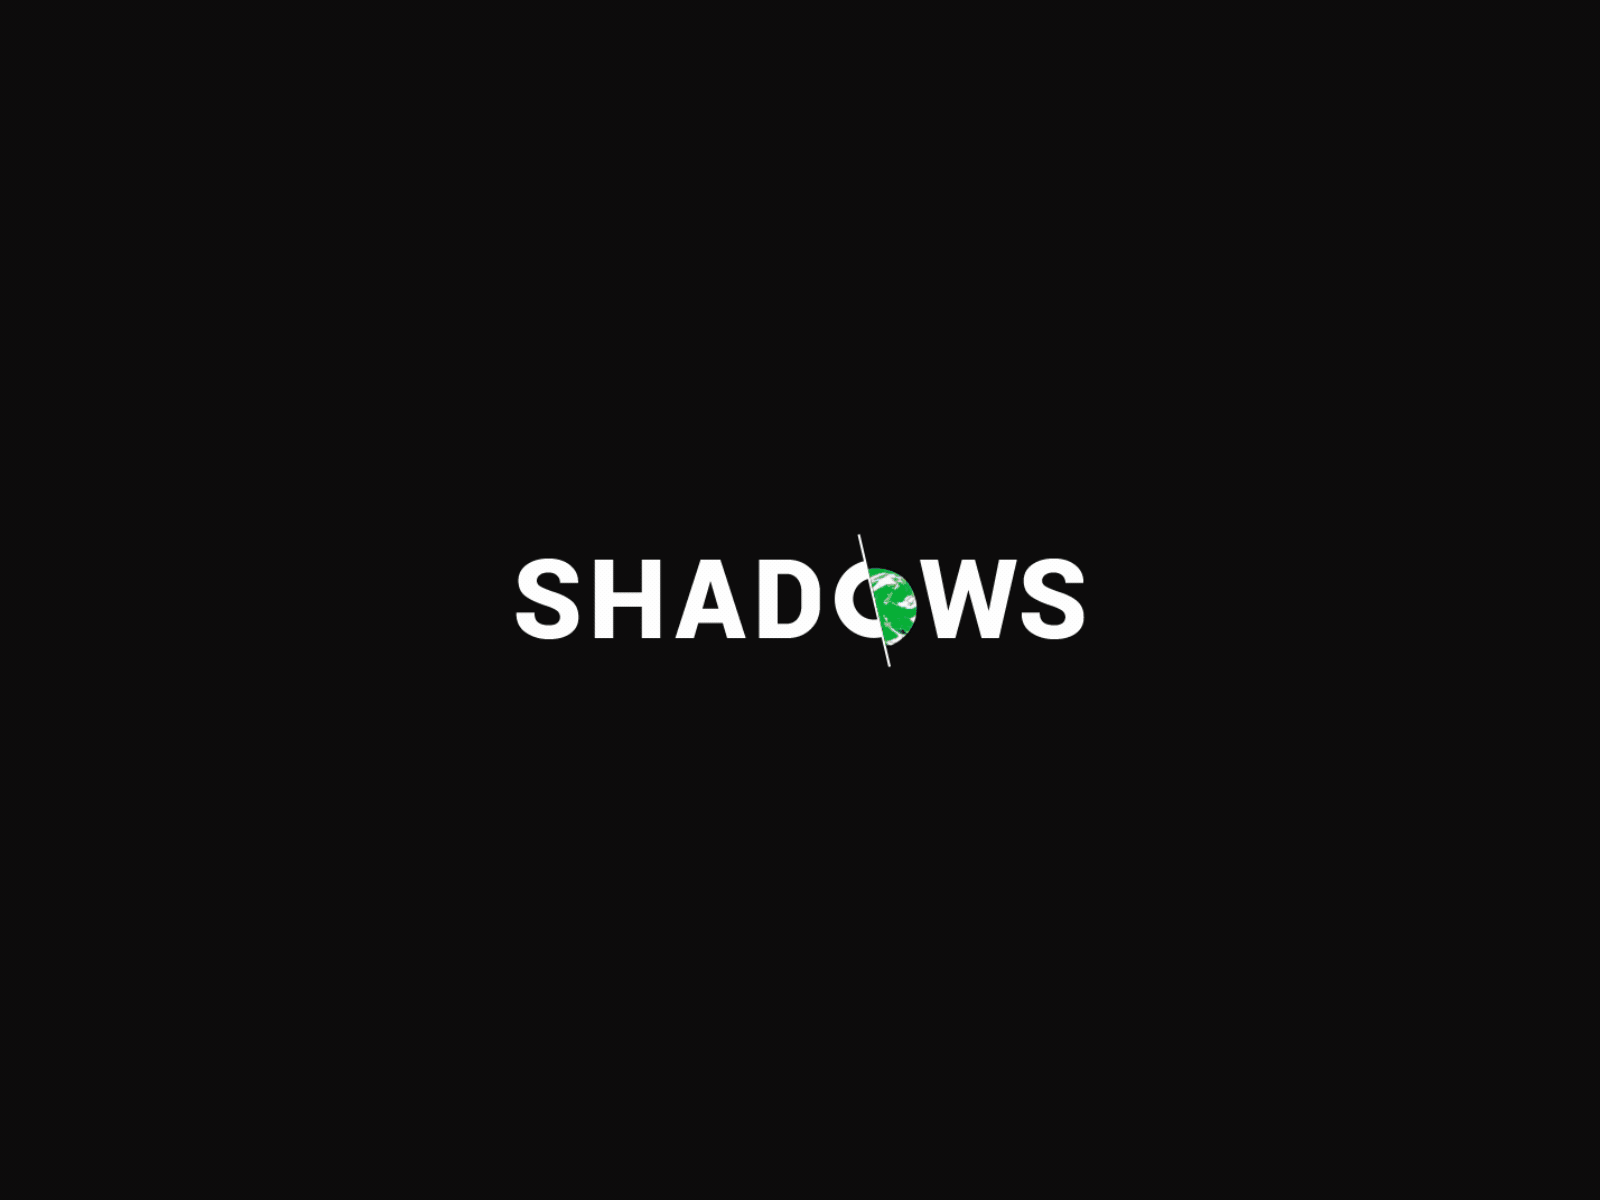 Shadows by IDEST Agency on Dribbble